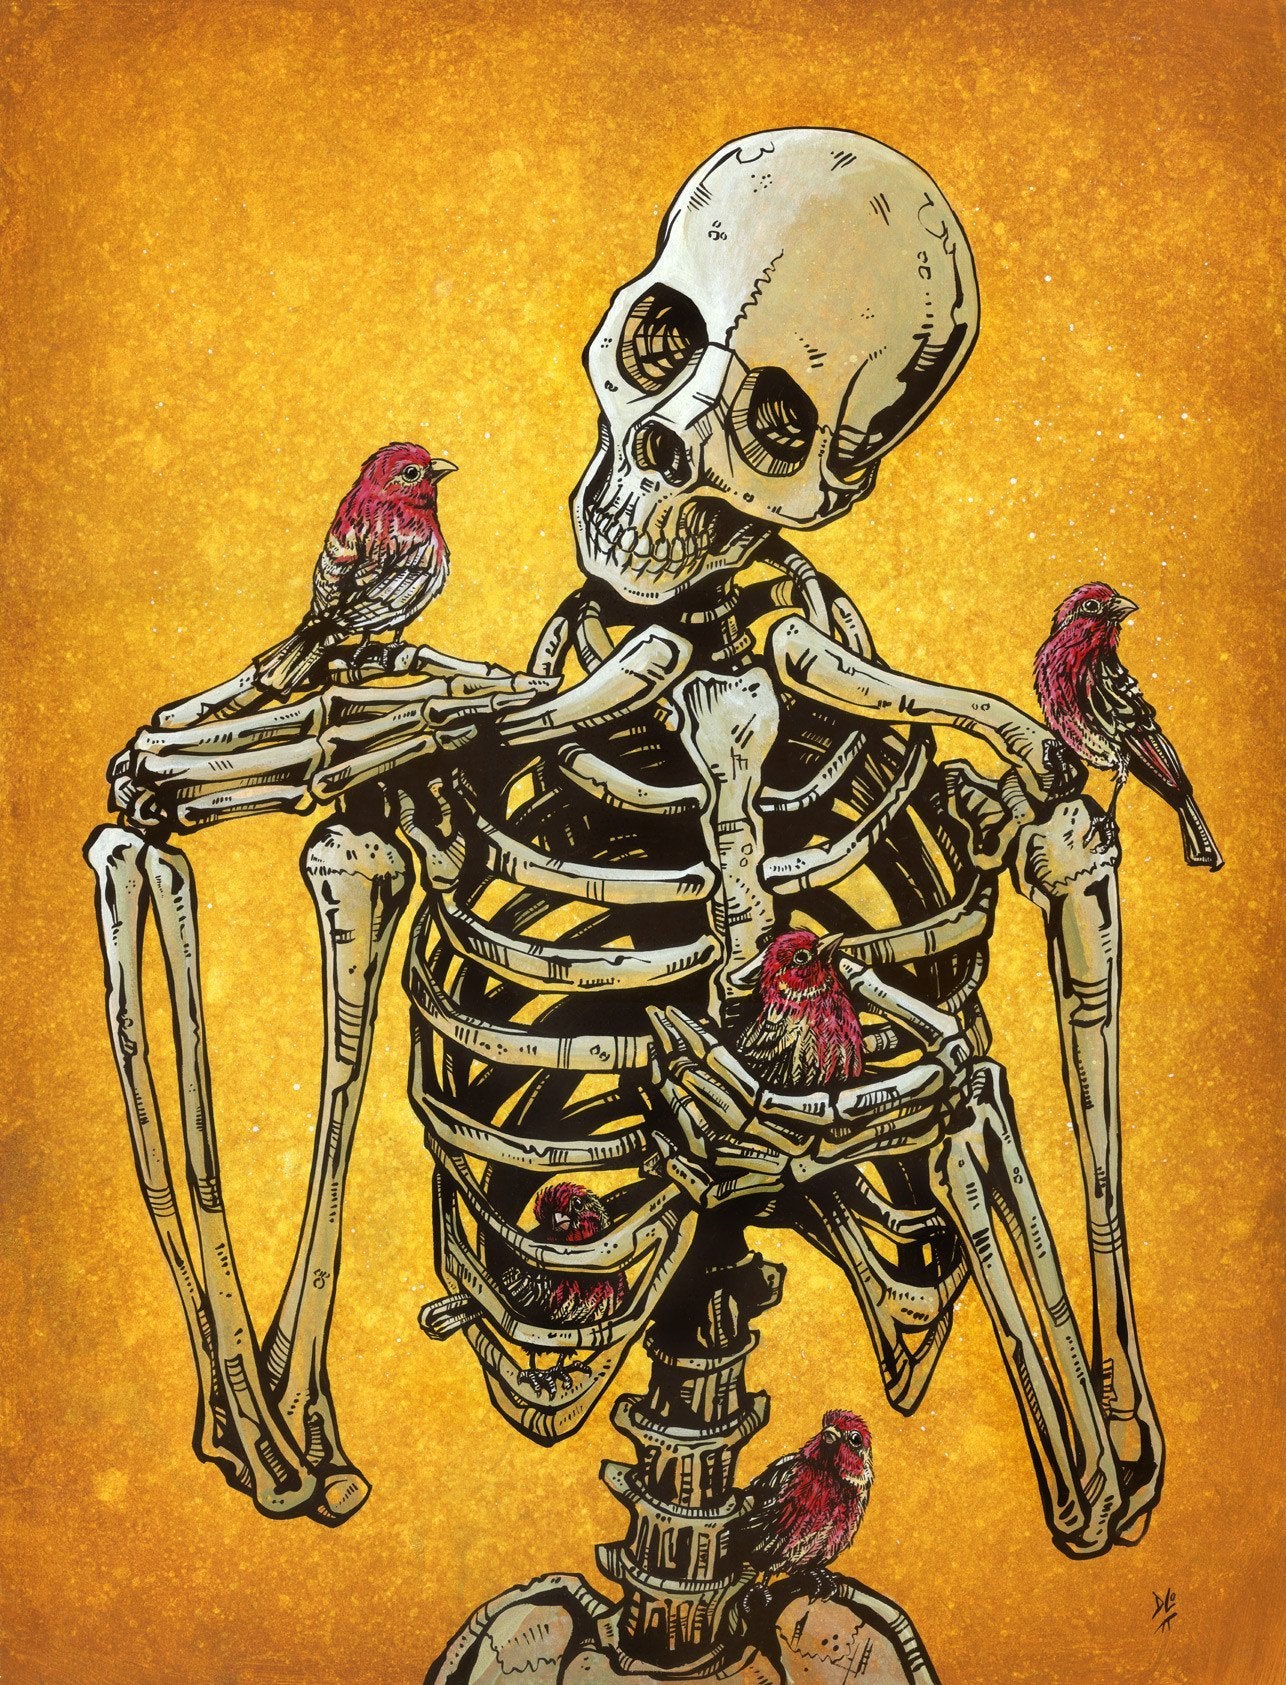 Birds of a Feather by Day of the Dead Artist David Lozeau, Day of the Dead Art, Dia de los Muertos Art, Dia de los Muertos Artist